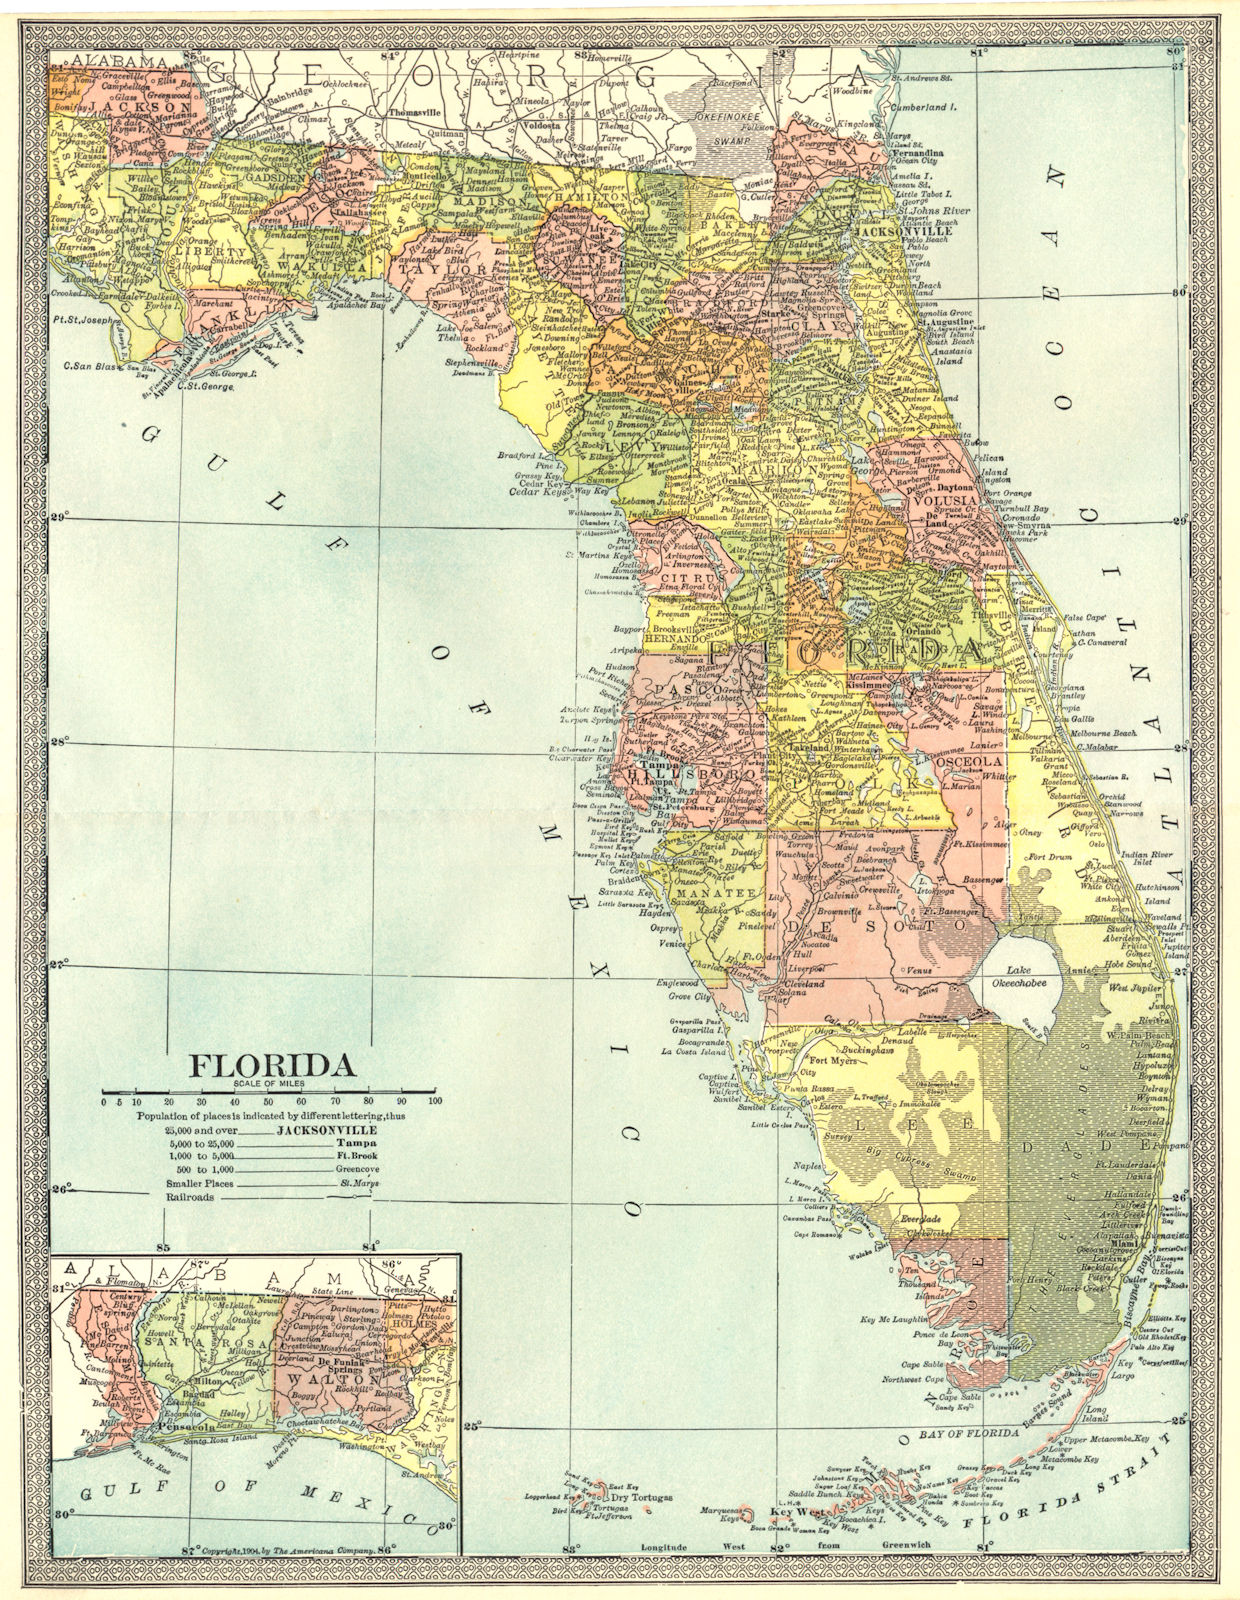 Associate Product FLORIDA state map. Counties 1907 old antique vintage plan chart